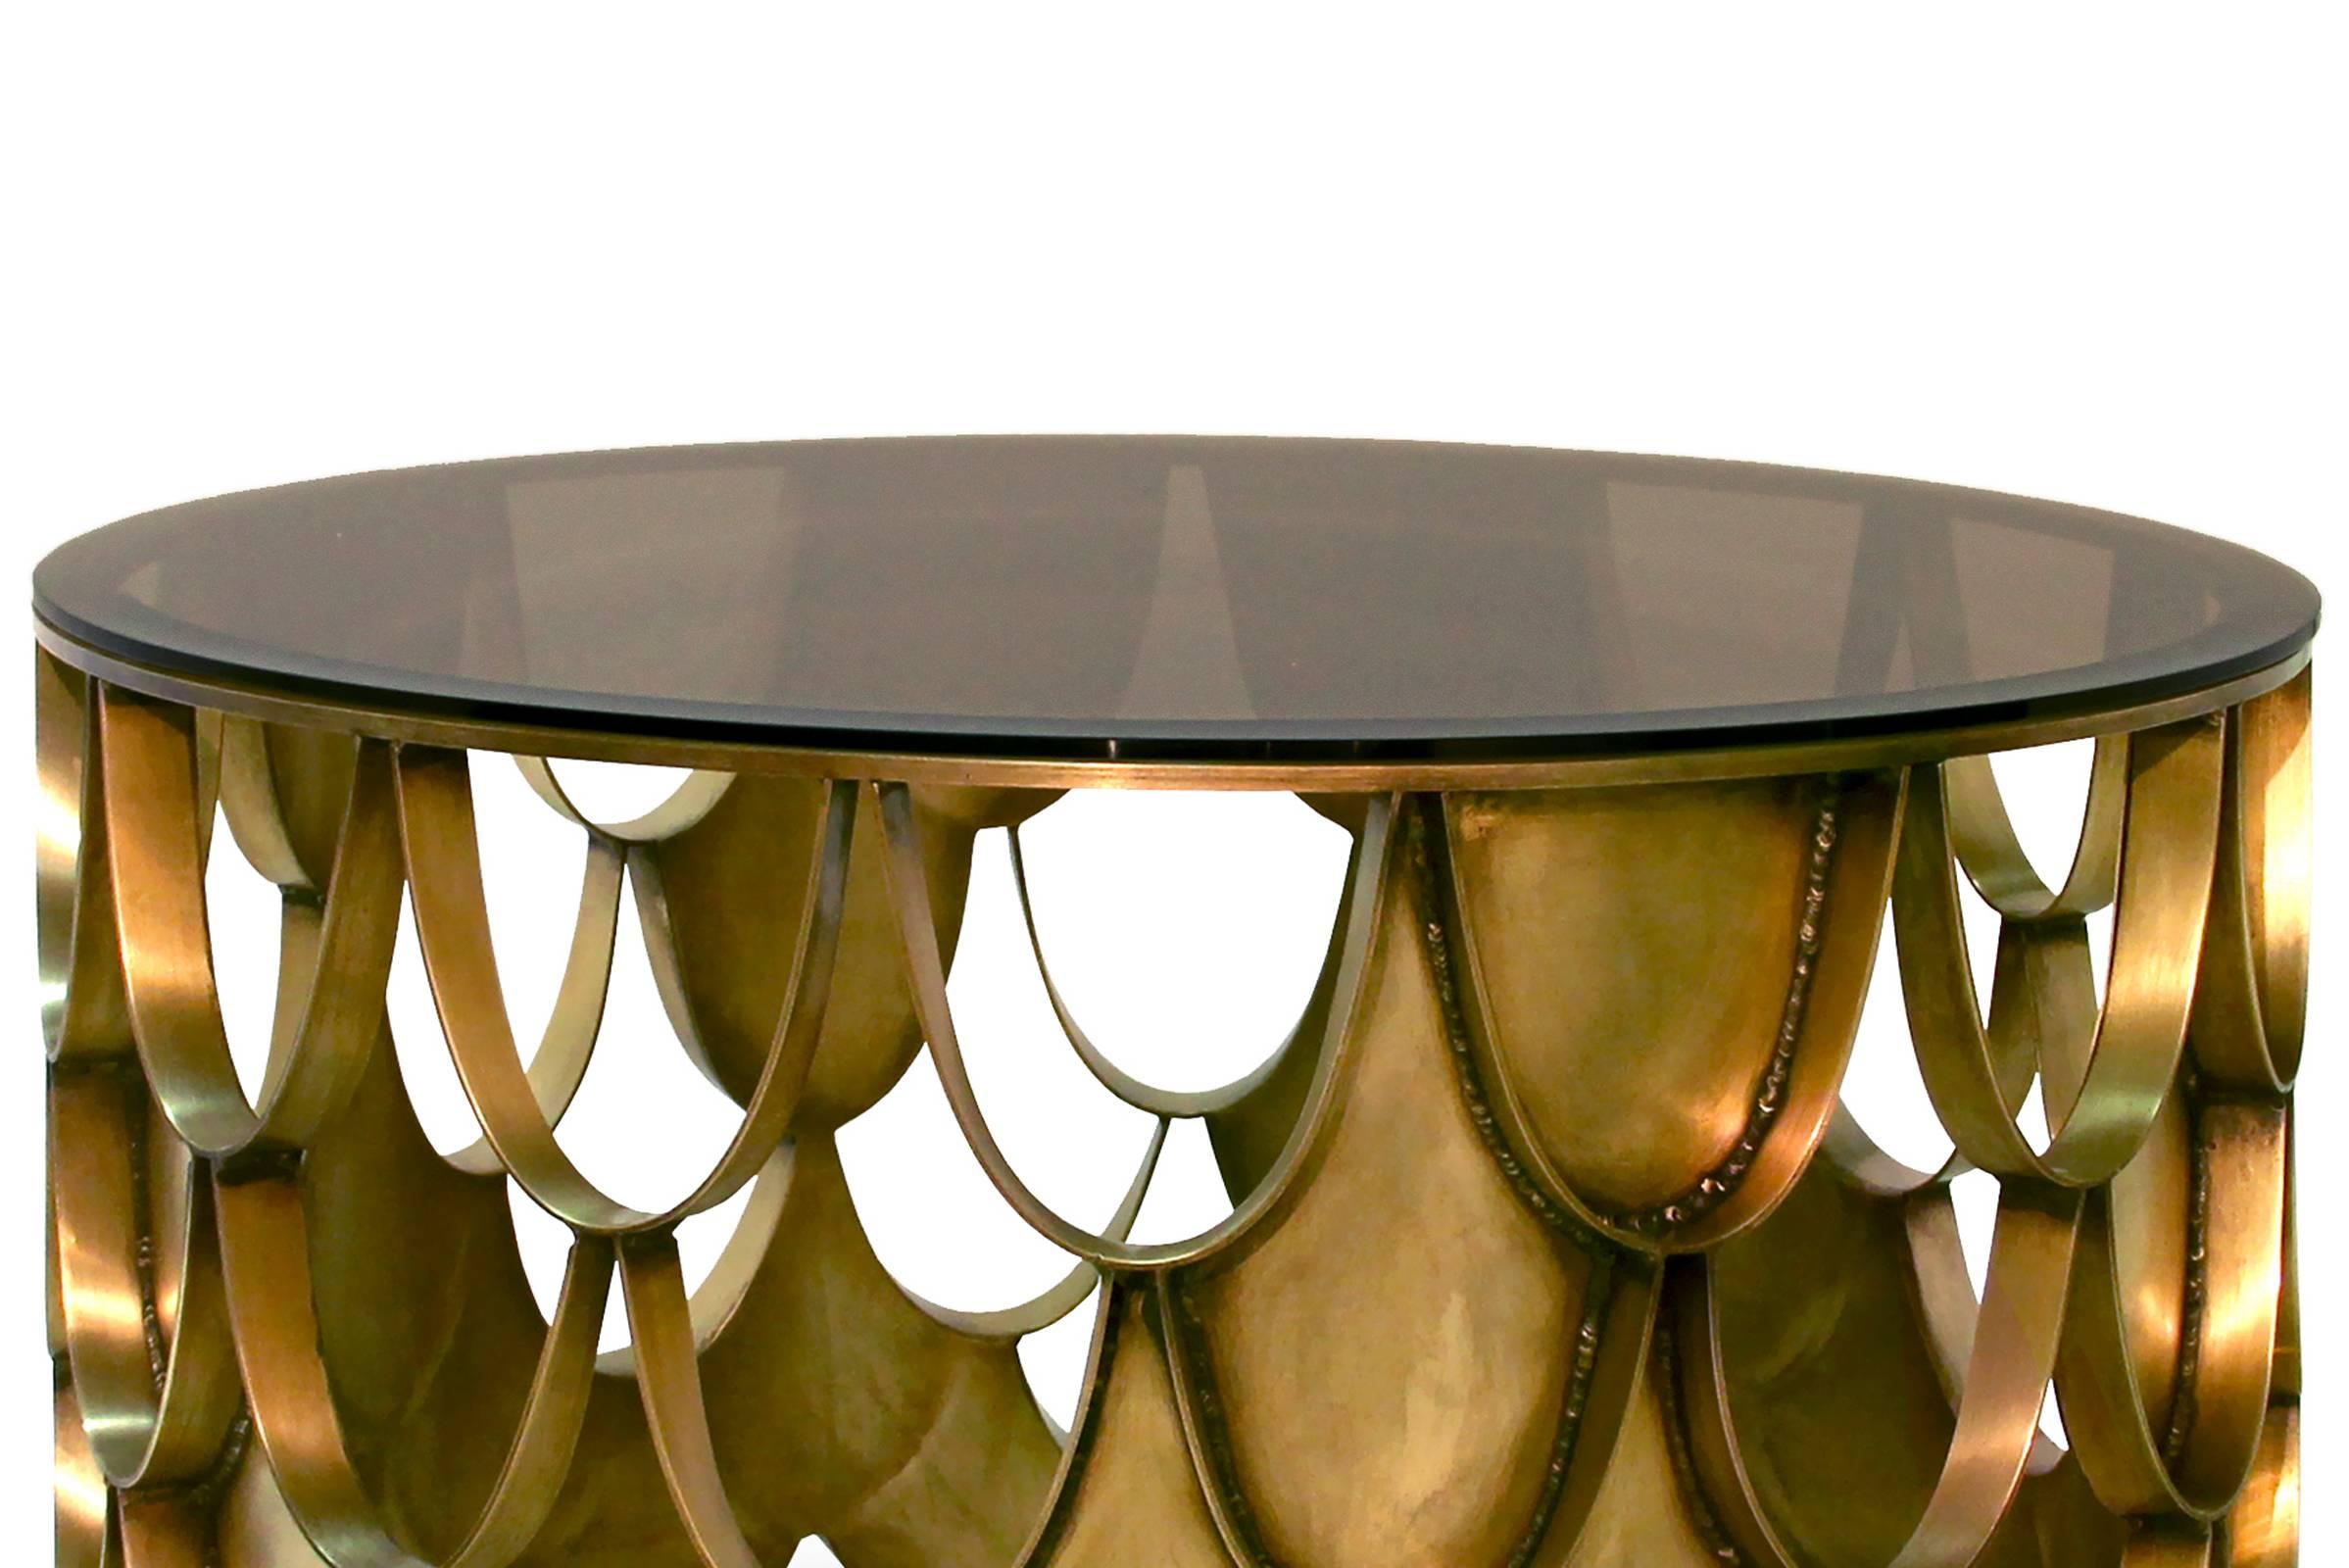 Portuguese Japanese Carpus Coffee Table in Aged Brass For Sale